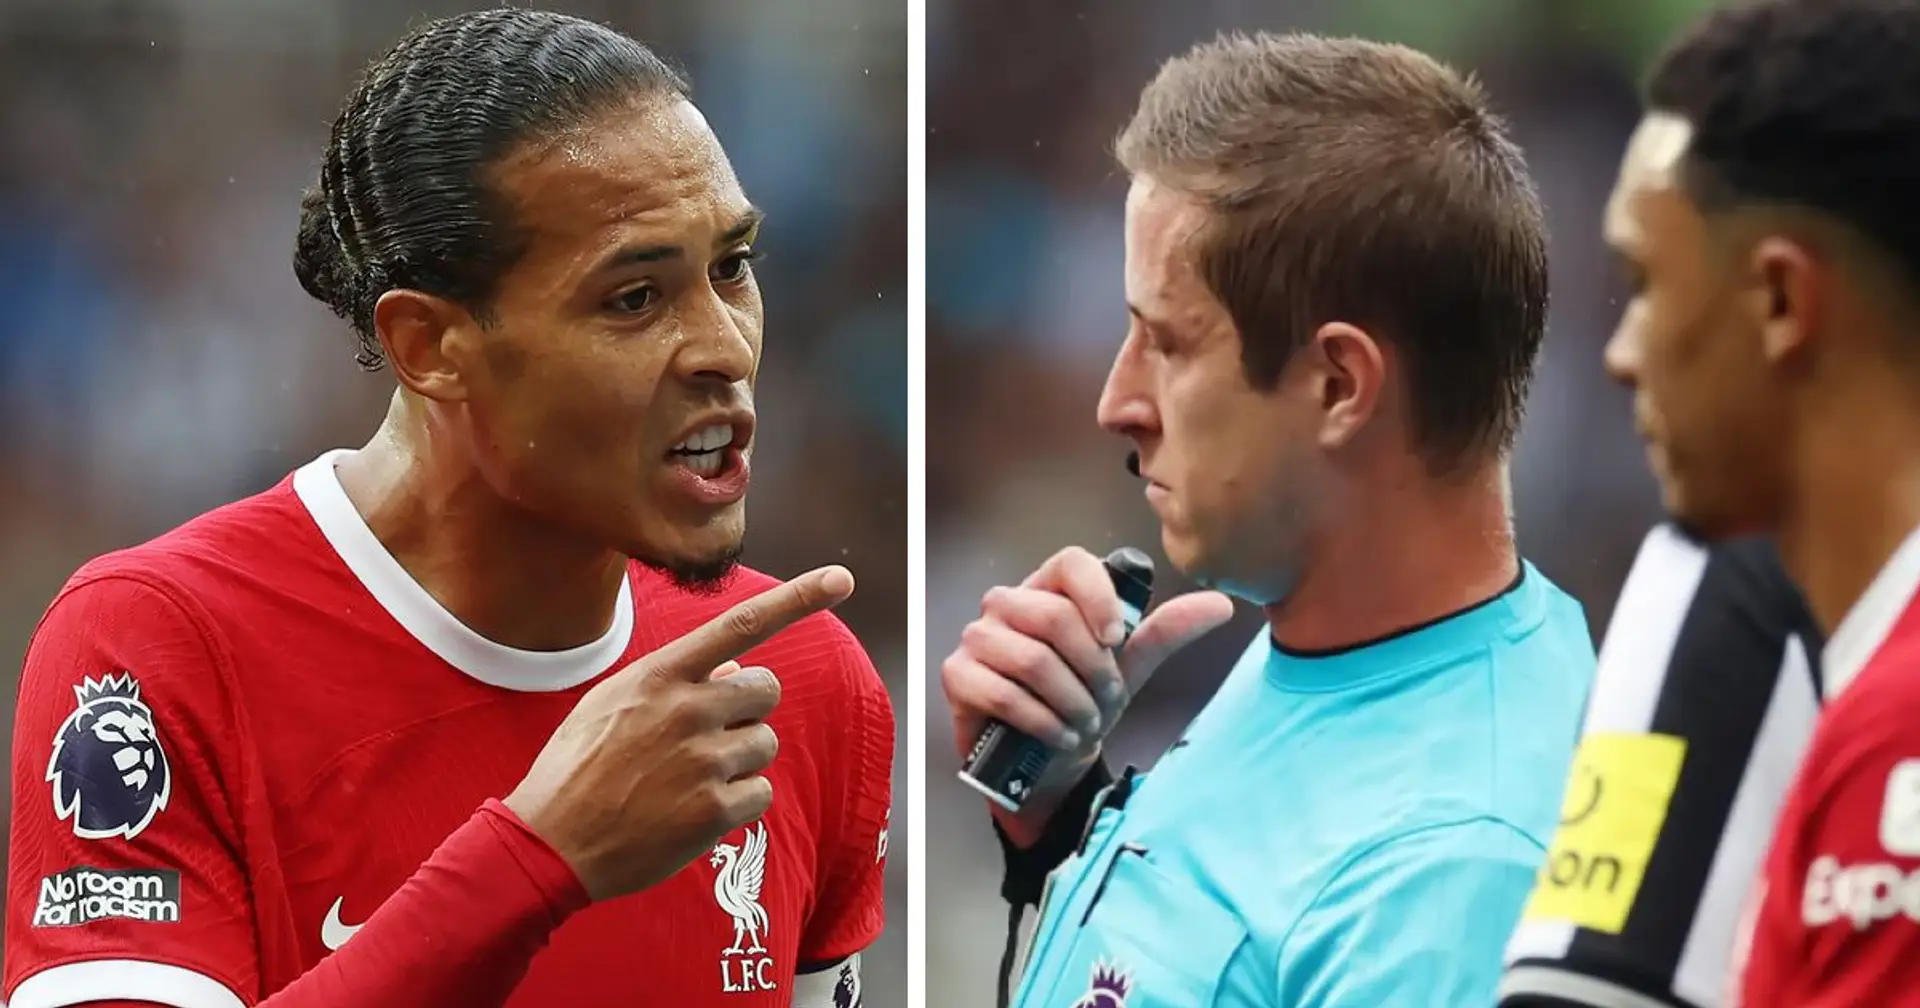 'It’s an anti-Liverpool agenda': Reds fans react to FA charging Van Dijk with improper conduct